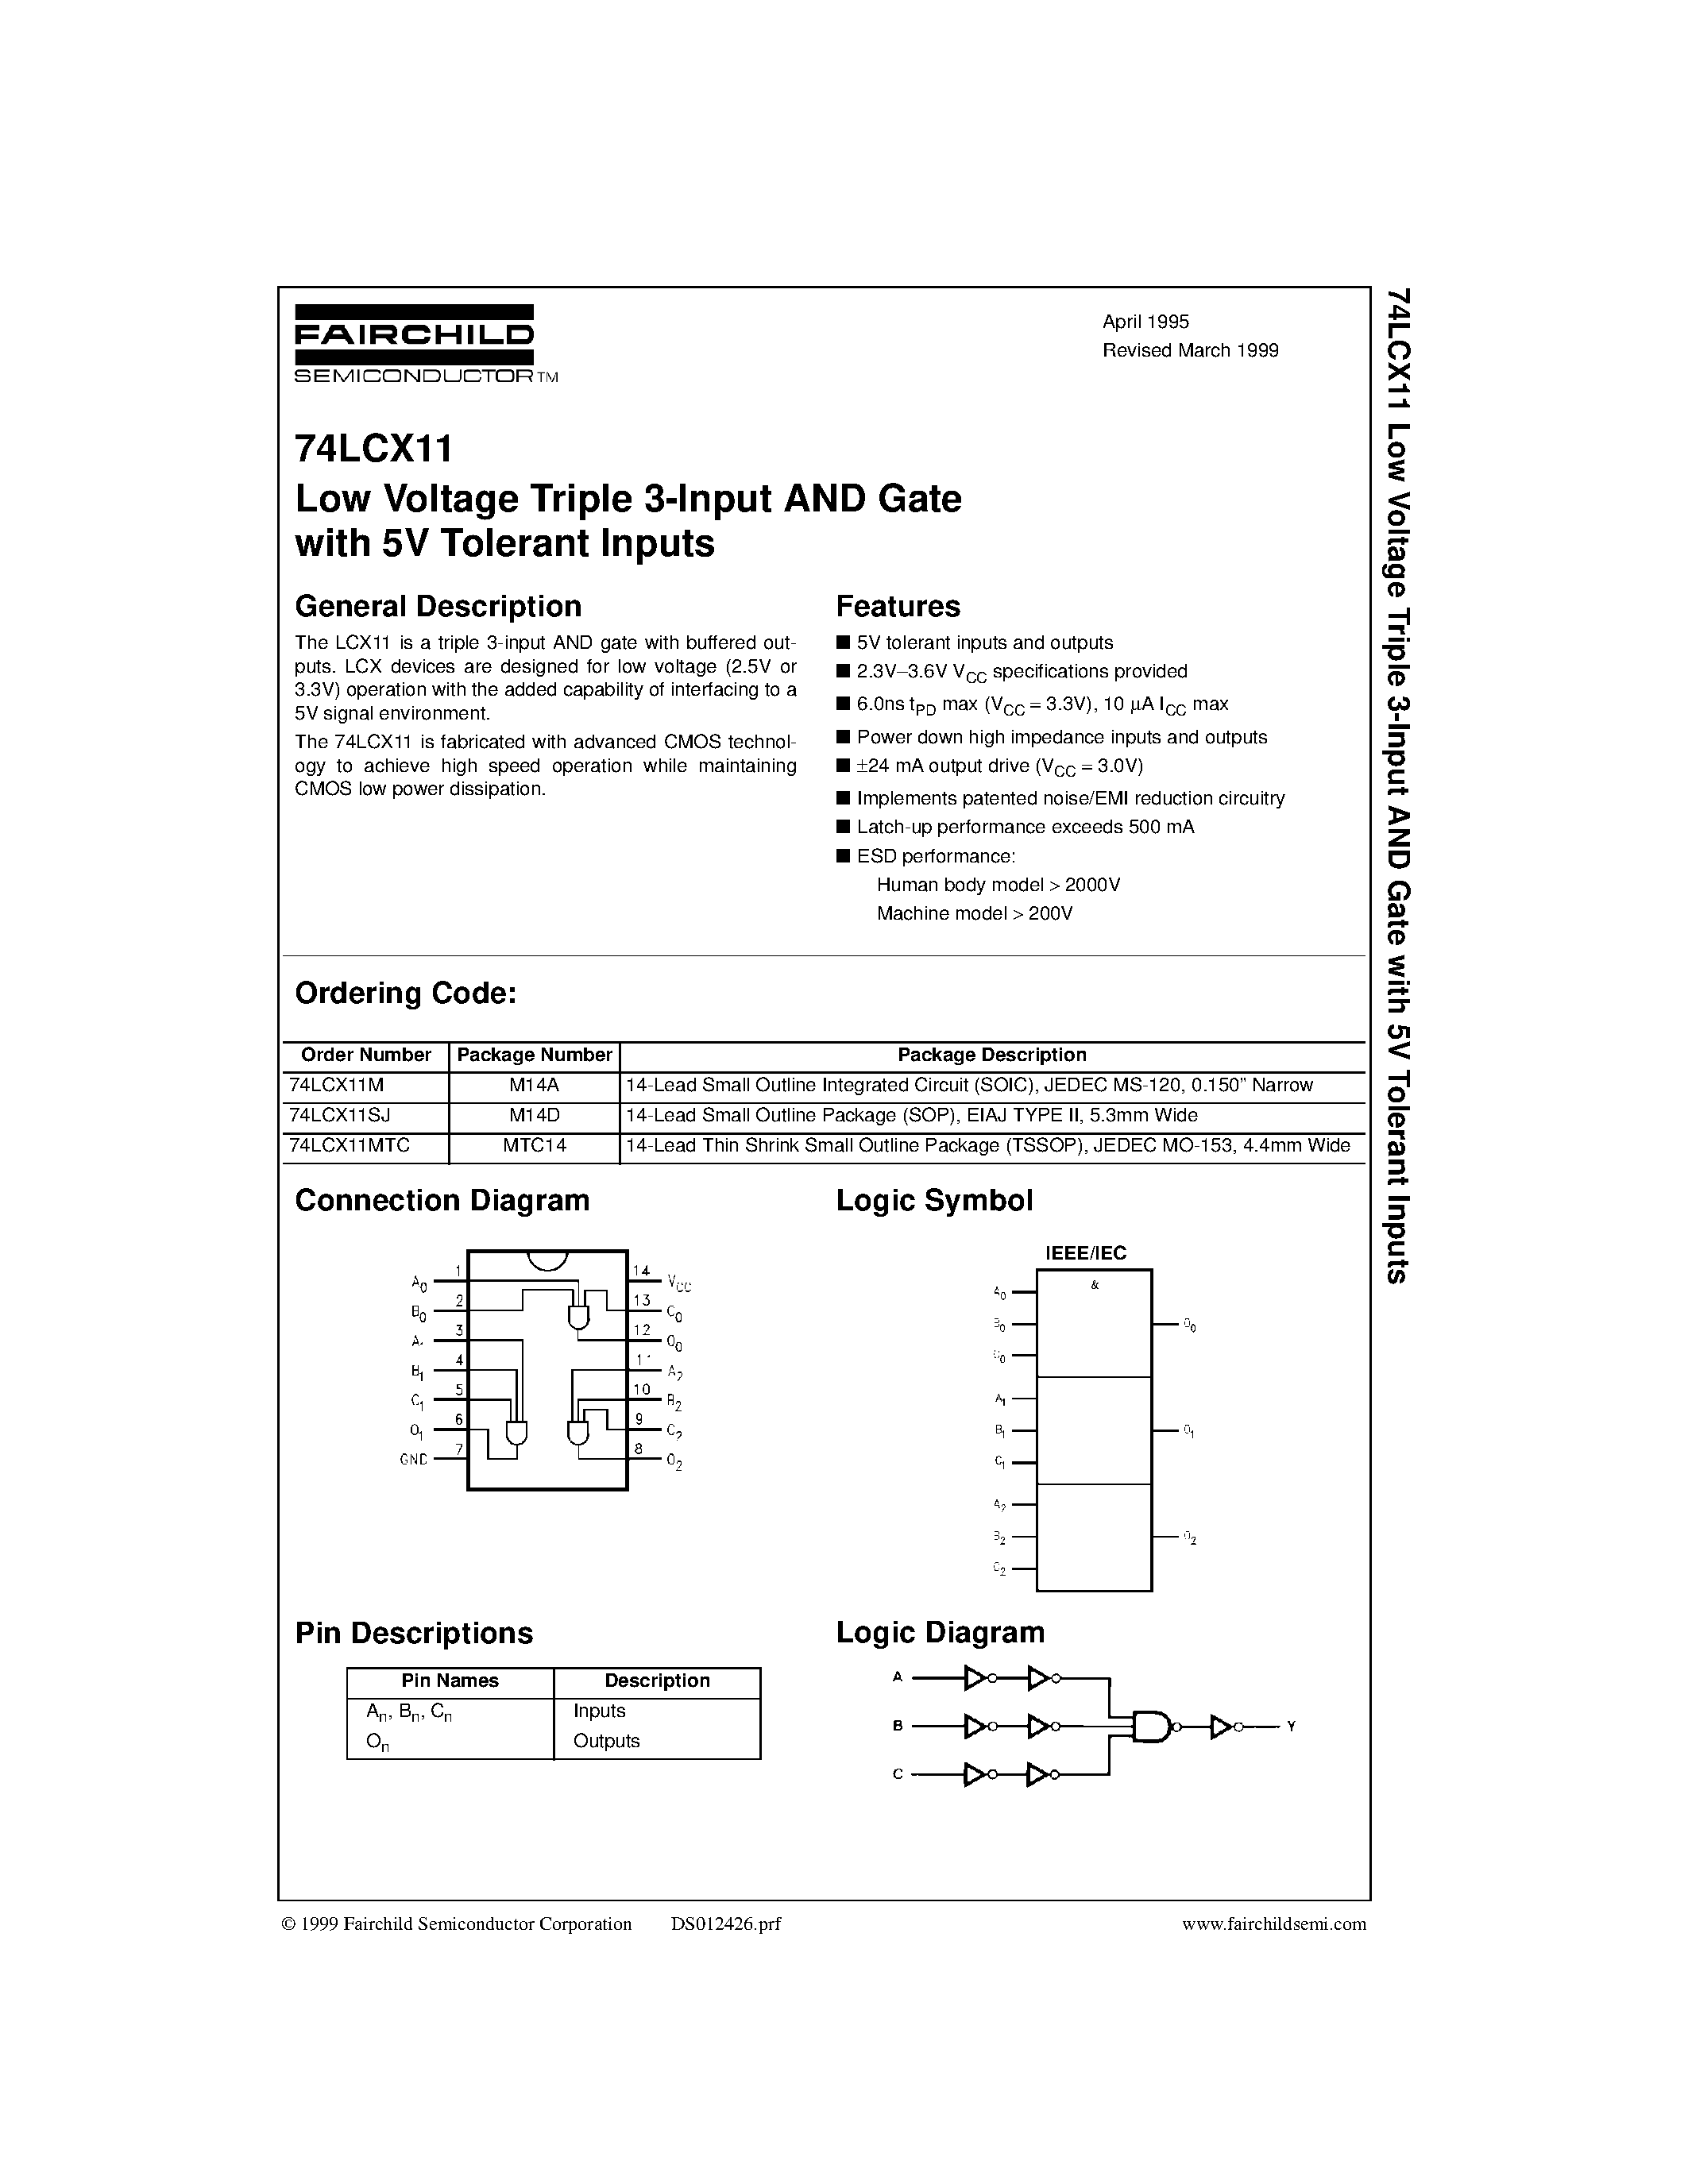 Datasheet 74LCX11MTC - Low Voltage Triple 3-Input AND Gate with 5V Tolerant Inputs page 1